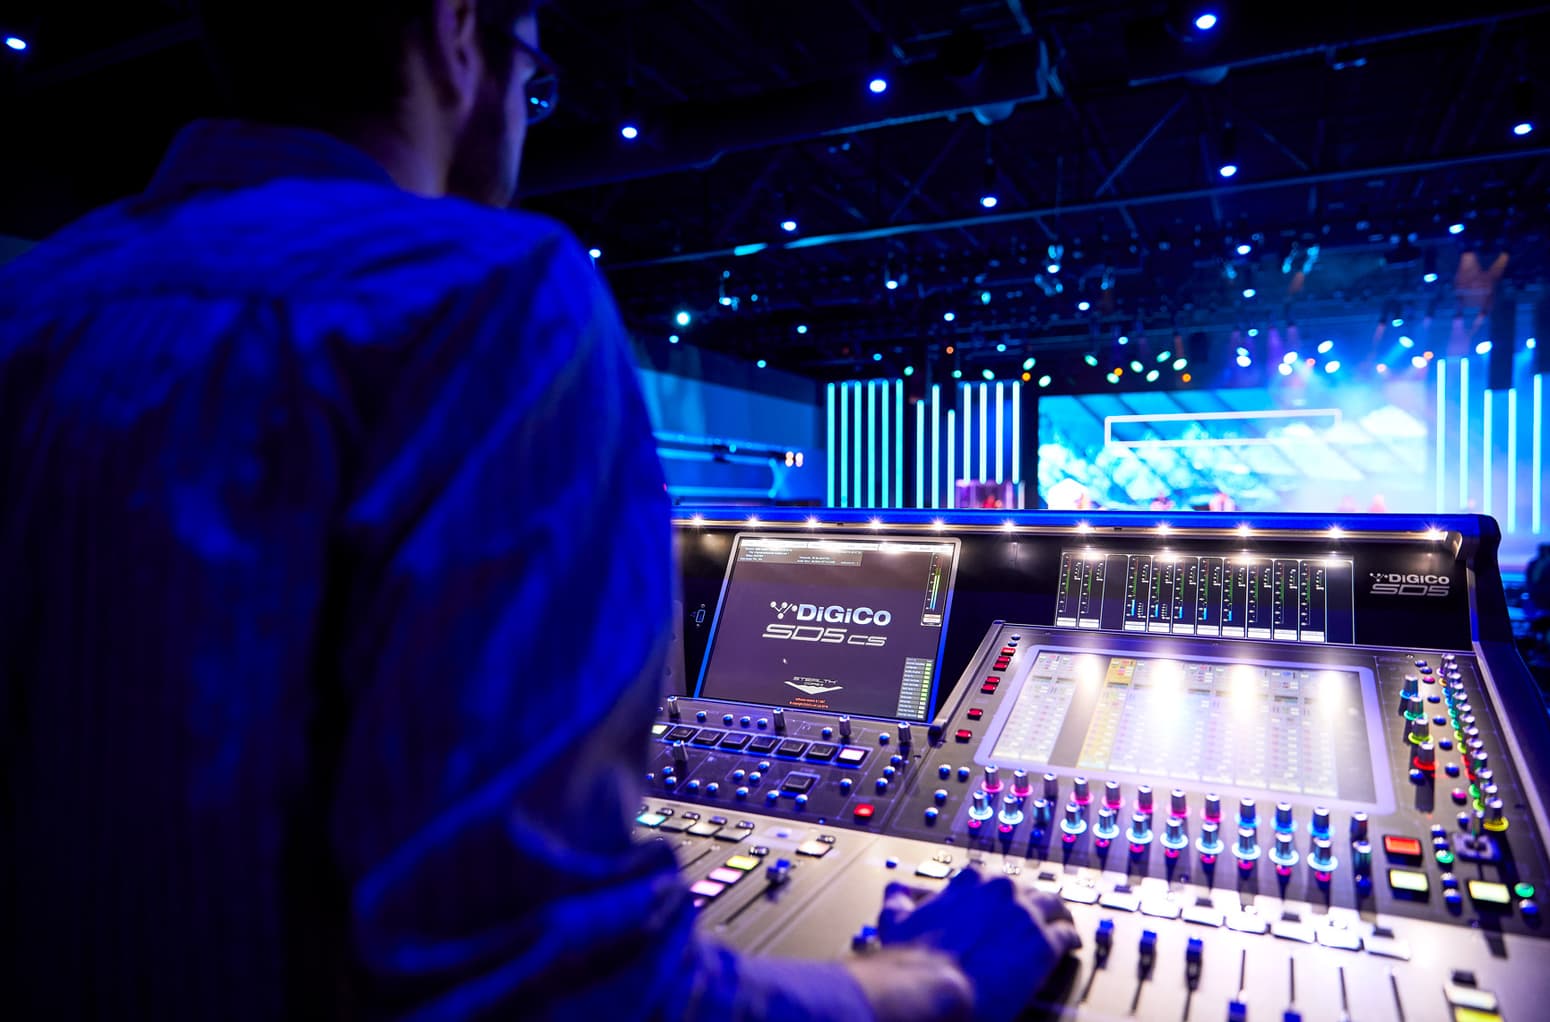 Managing the church stage lighting system and speakers is easy with this state-of-the-art equipment.